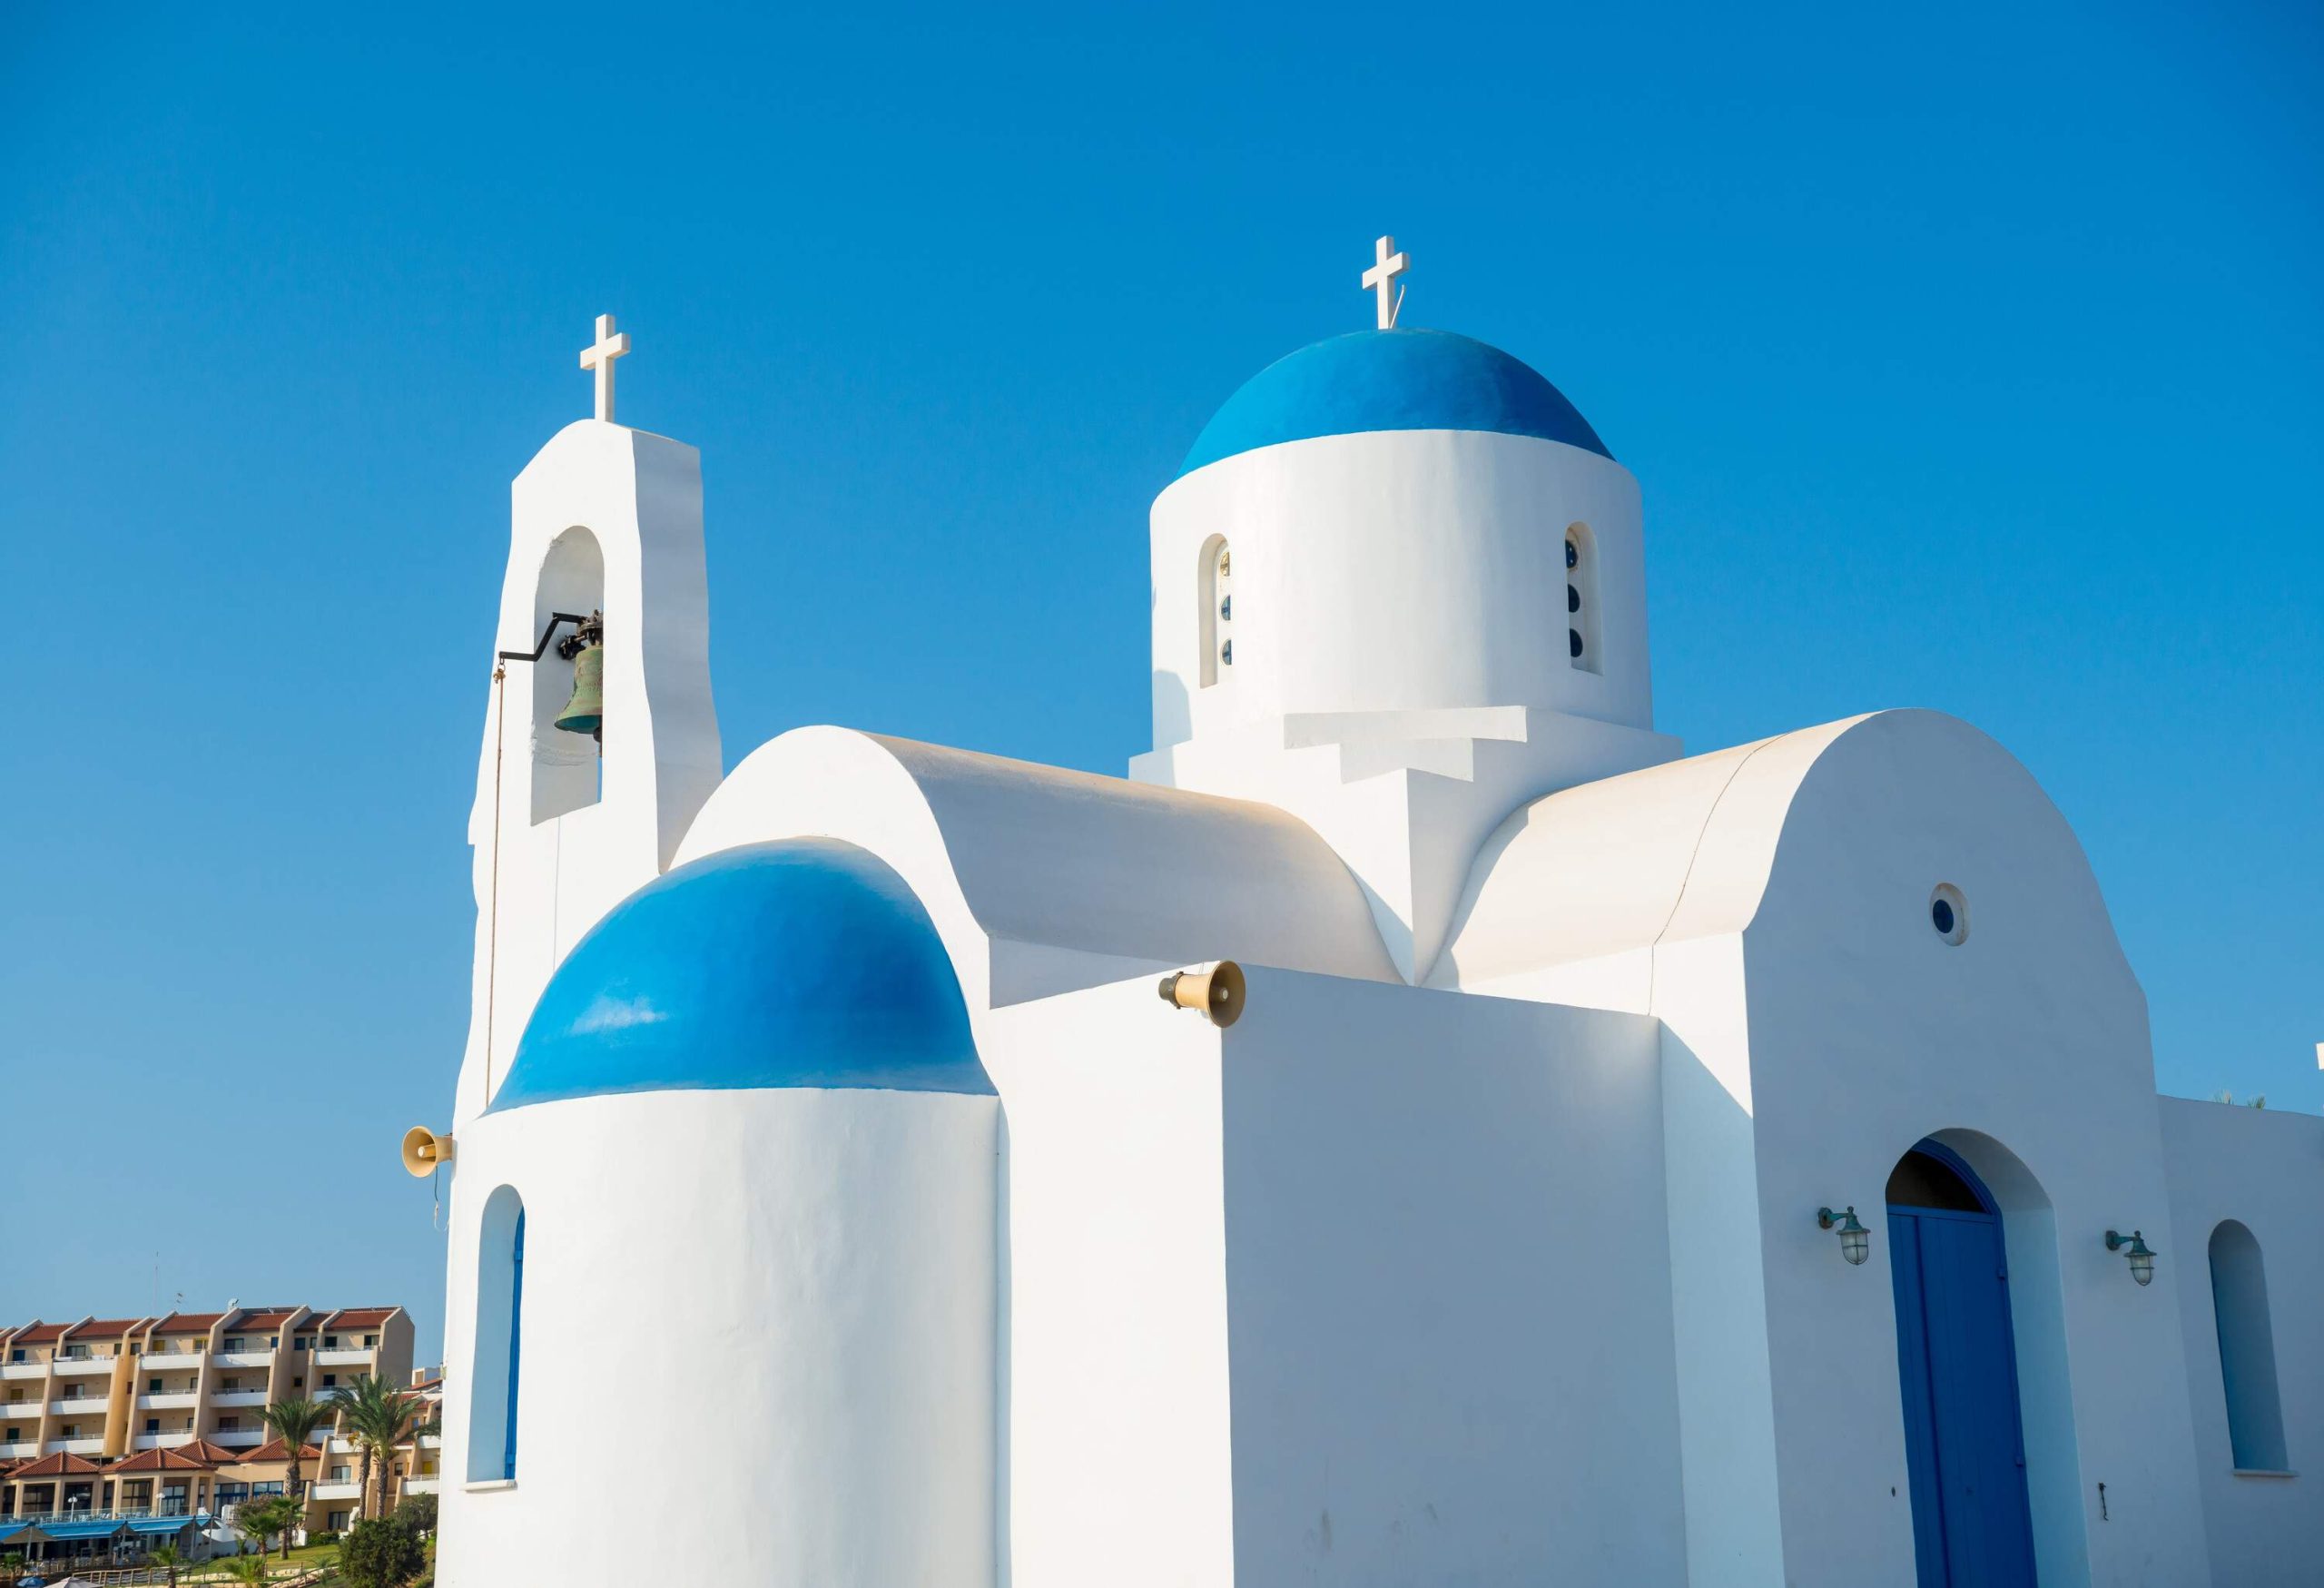 A white church with blue dome roofs and door, and a bell tower with cross finials.